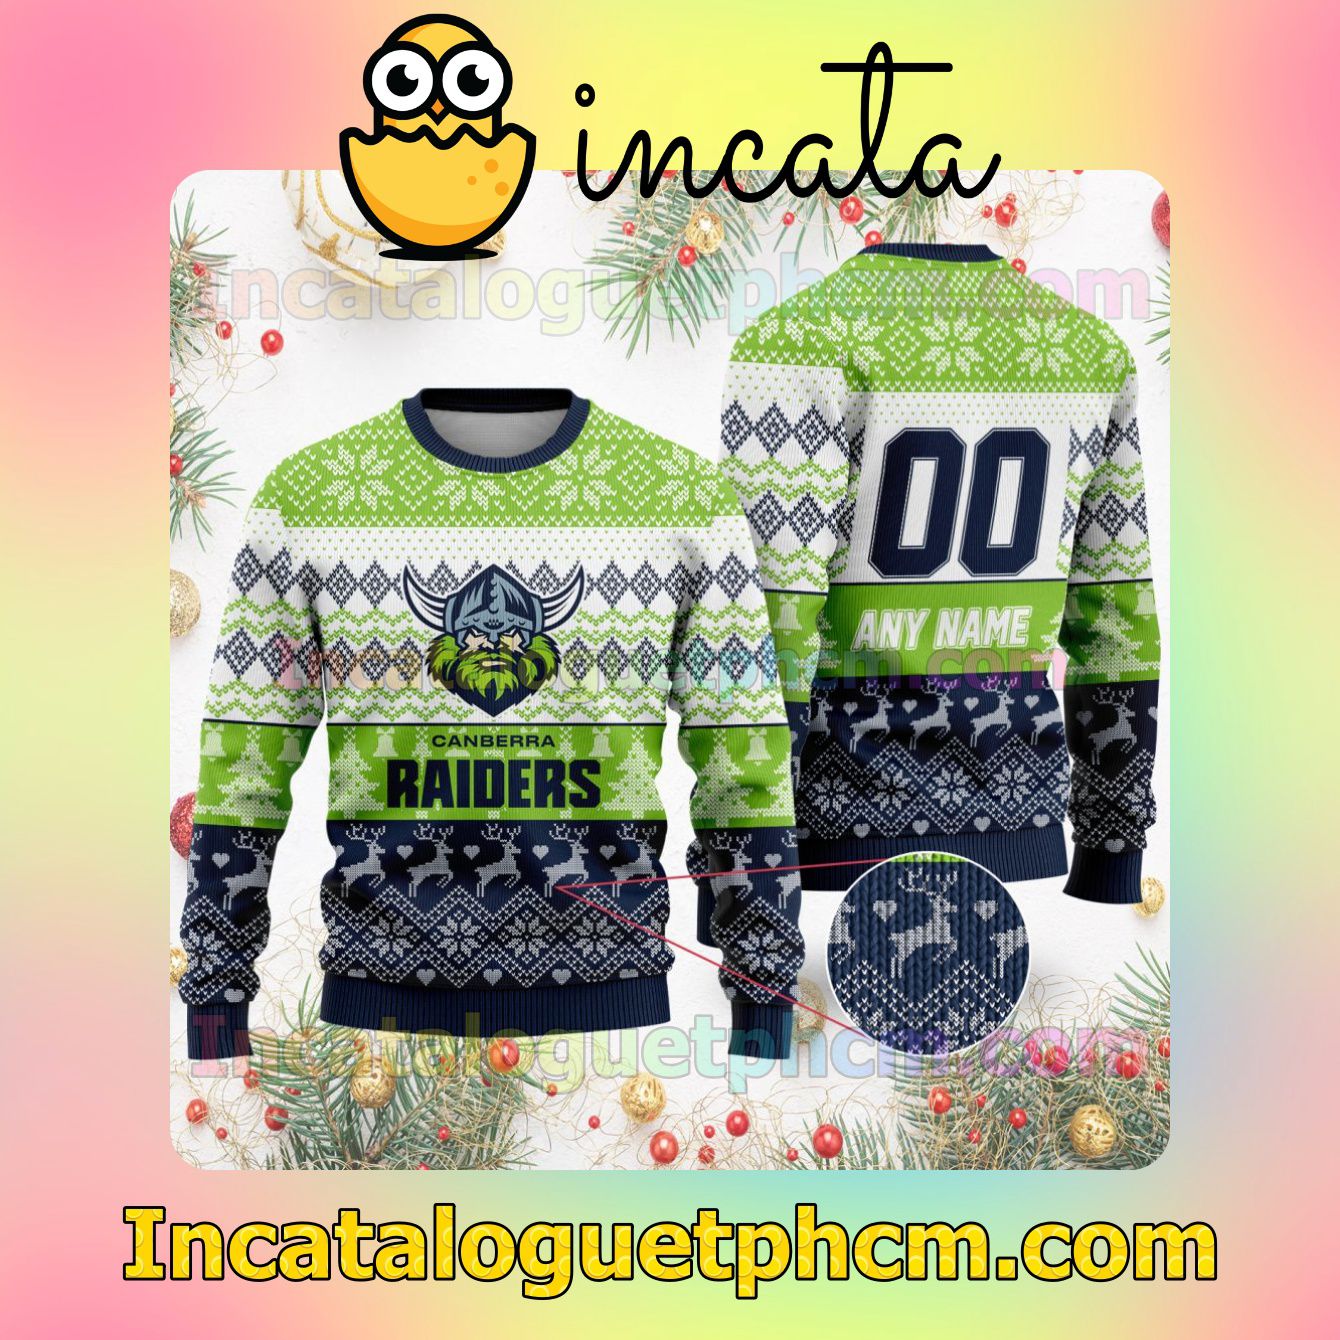 Amazon NRL Canberra Raiders Ugly Christmas Jumper Sweater